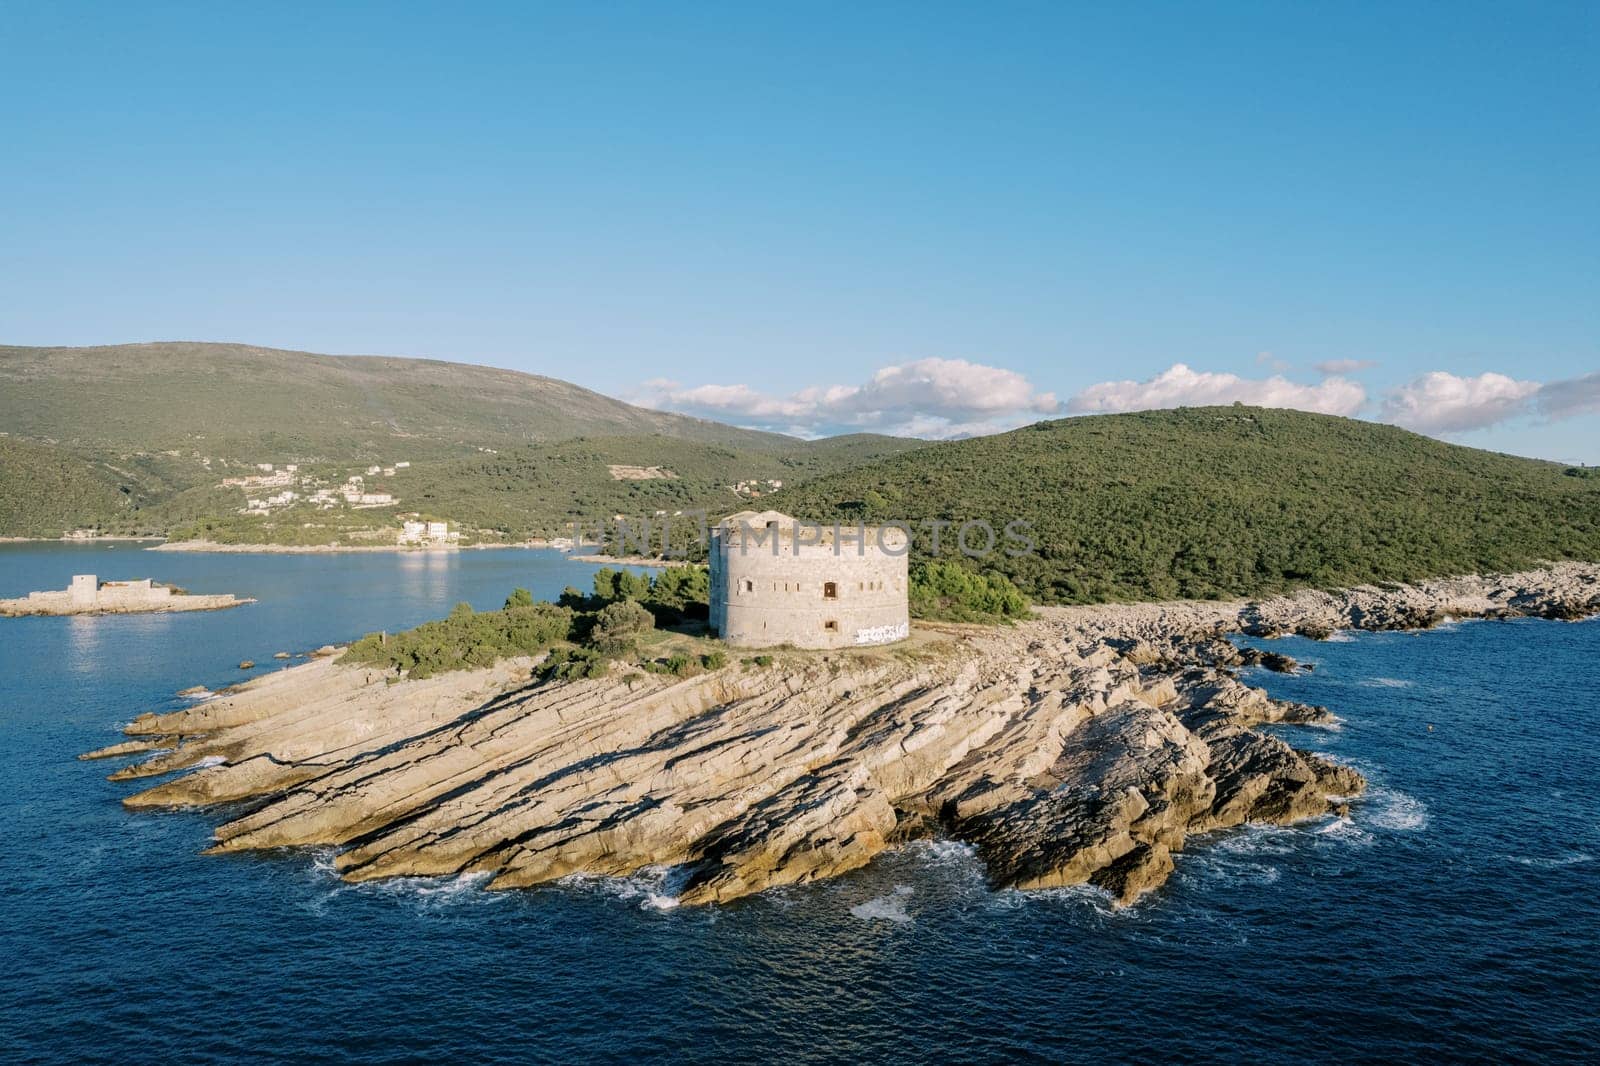 Arza fortress on a rocky cape in the Bay of Kotor. Montenegro. High quality photo